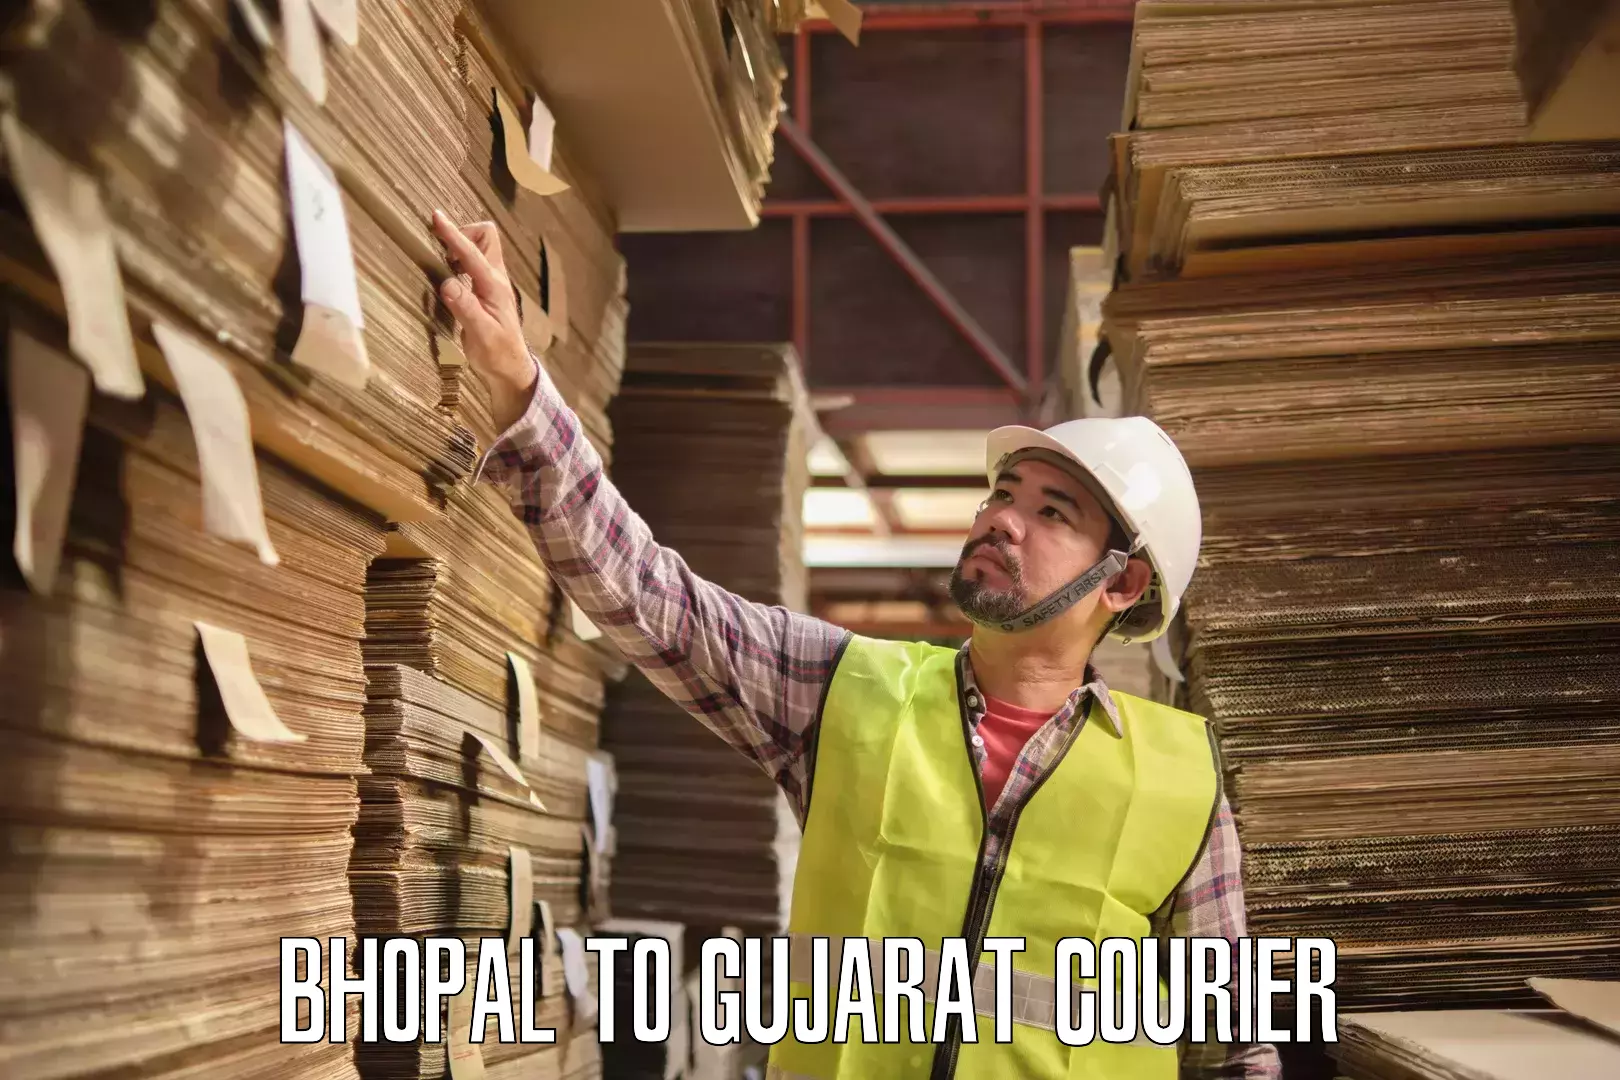 Courier tracking online Bhopal to Ahmedabad